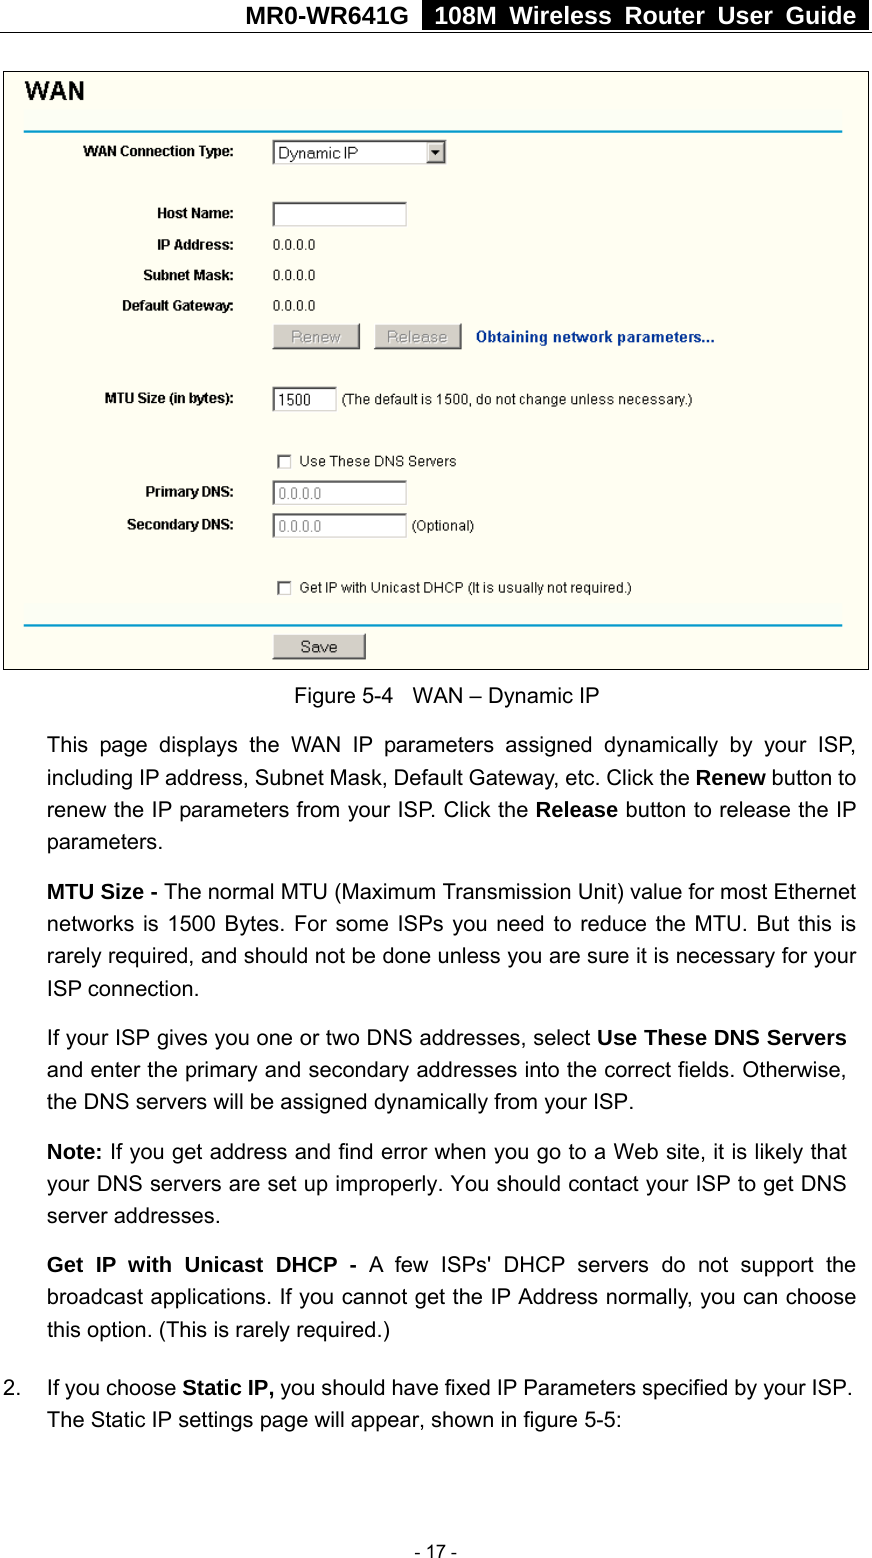 MR0-WR641G   108M Wireless Router User Guide   Figure 5-4  WAN – Dynamic IP This page displays the WAN IP parameters assigned dynamically by your ISP, including IP address, Subnet Mask, Default Gateway, etc. Click the Renew button to renew the IP parameters from your ISP. Click the Release button to release the IP parameters. MTU Size - The normal MTU (Maximum Transmission Unit) value for most Ethernet networks is 1500 Bytes. For some ISPs you need to reduce the MTU. But this is rarely required, and should not be done unless you are sure it is necessary for your ISP connection. If your ISP gives you one or two DNS addresses, select Use These DNS Servers and enter the primary and secondary addresses into the correct fields. Otherwise, the DNS servers will be assigned dynamically from your ISP.  Note: If you get address and find error when you go to a Web site, it is likely that your DNS servers are set up improperly. You should contact your ISP to get DNS server addresses.   Get IP with Unicast DHCP - A few ISPs&apos; DHCP servers do not support the broadcast applications. If you cannot get the IP Address normally, you can choose this option. (This is rarely required.) 2.  If you choose Static IP, you should have fixed IP Parameters specified by your ISP. The Static IP settings page will appear, shown in figure 5-5:  - 17 - 